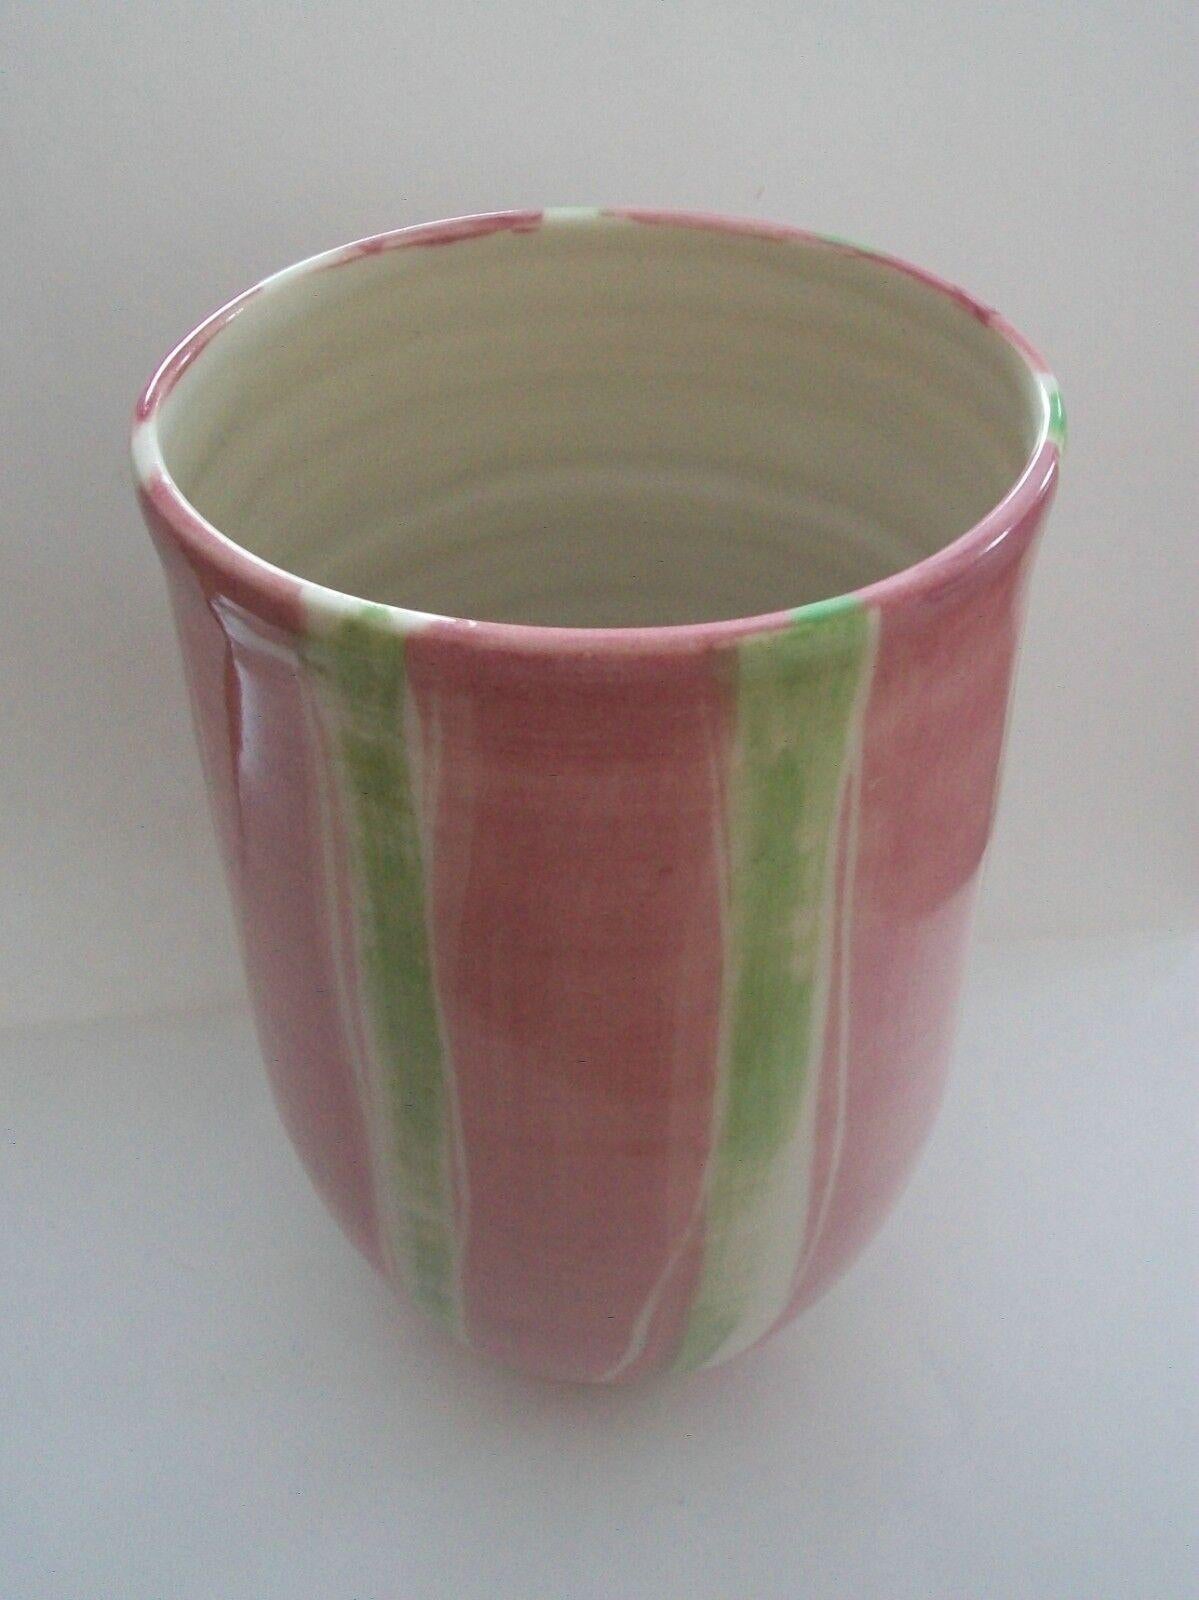 Hand Painted Wheel Thrown & Manipulated Porcelain Vase by Bender, 20th Century For Sale 1